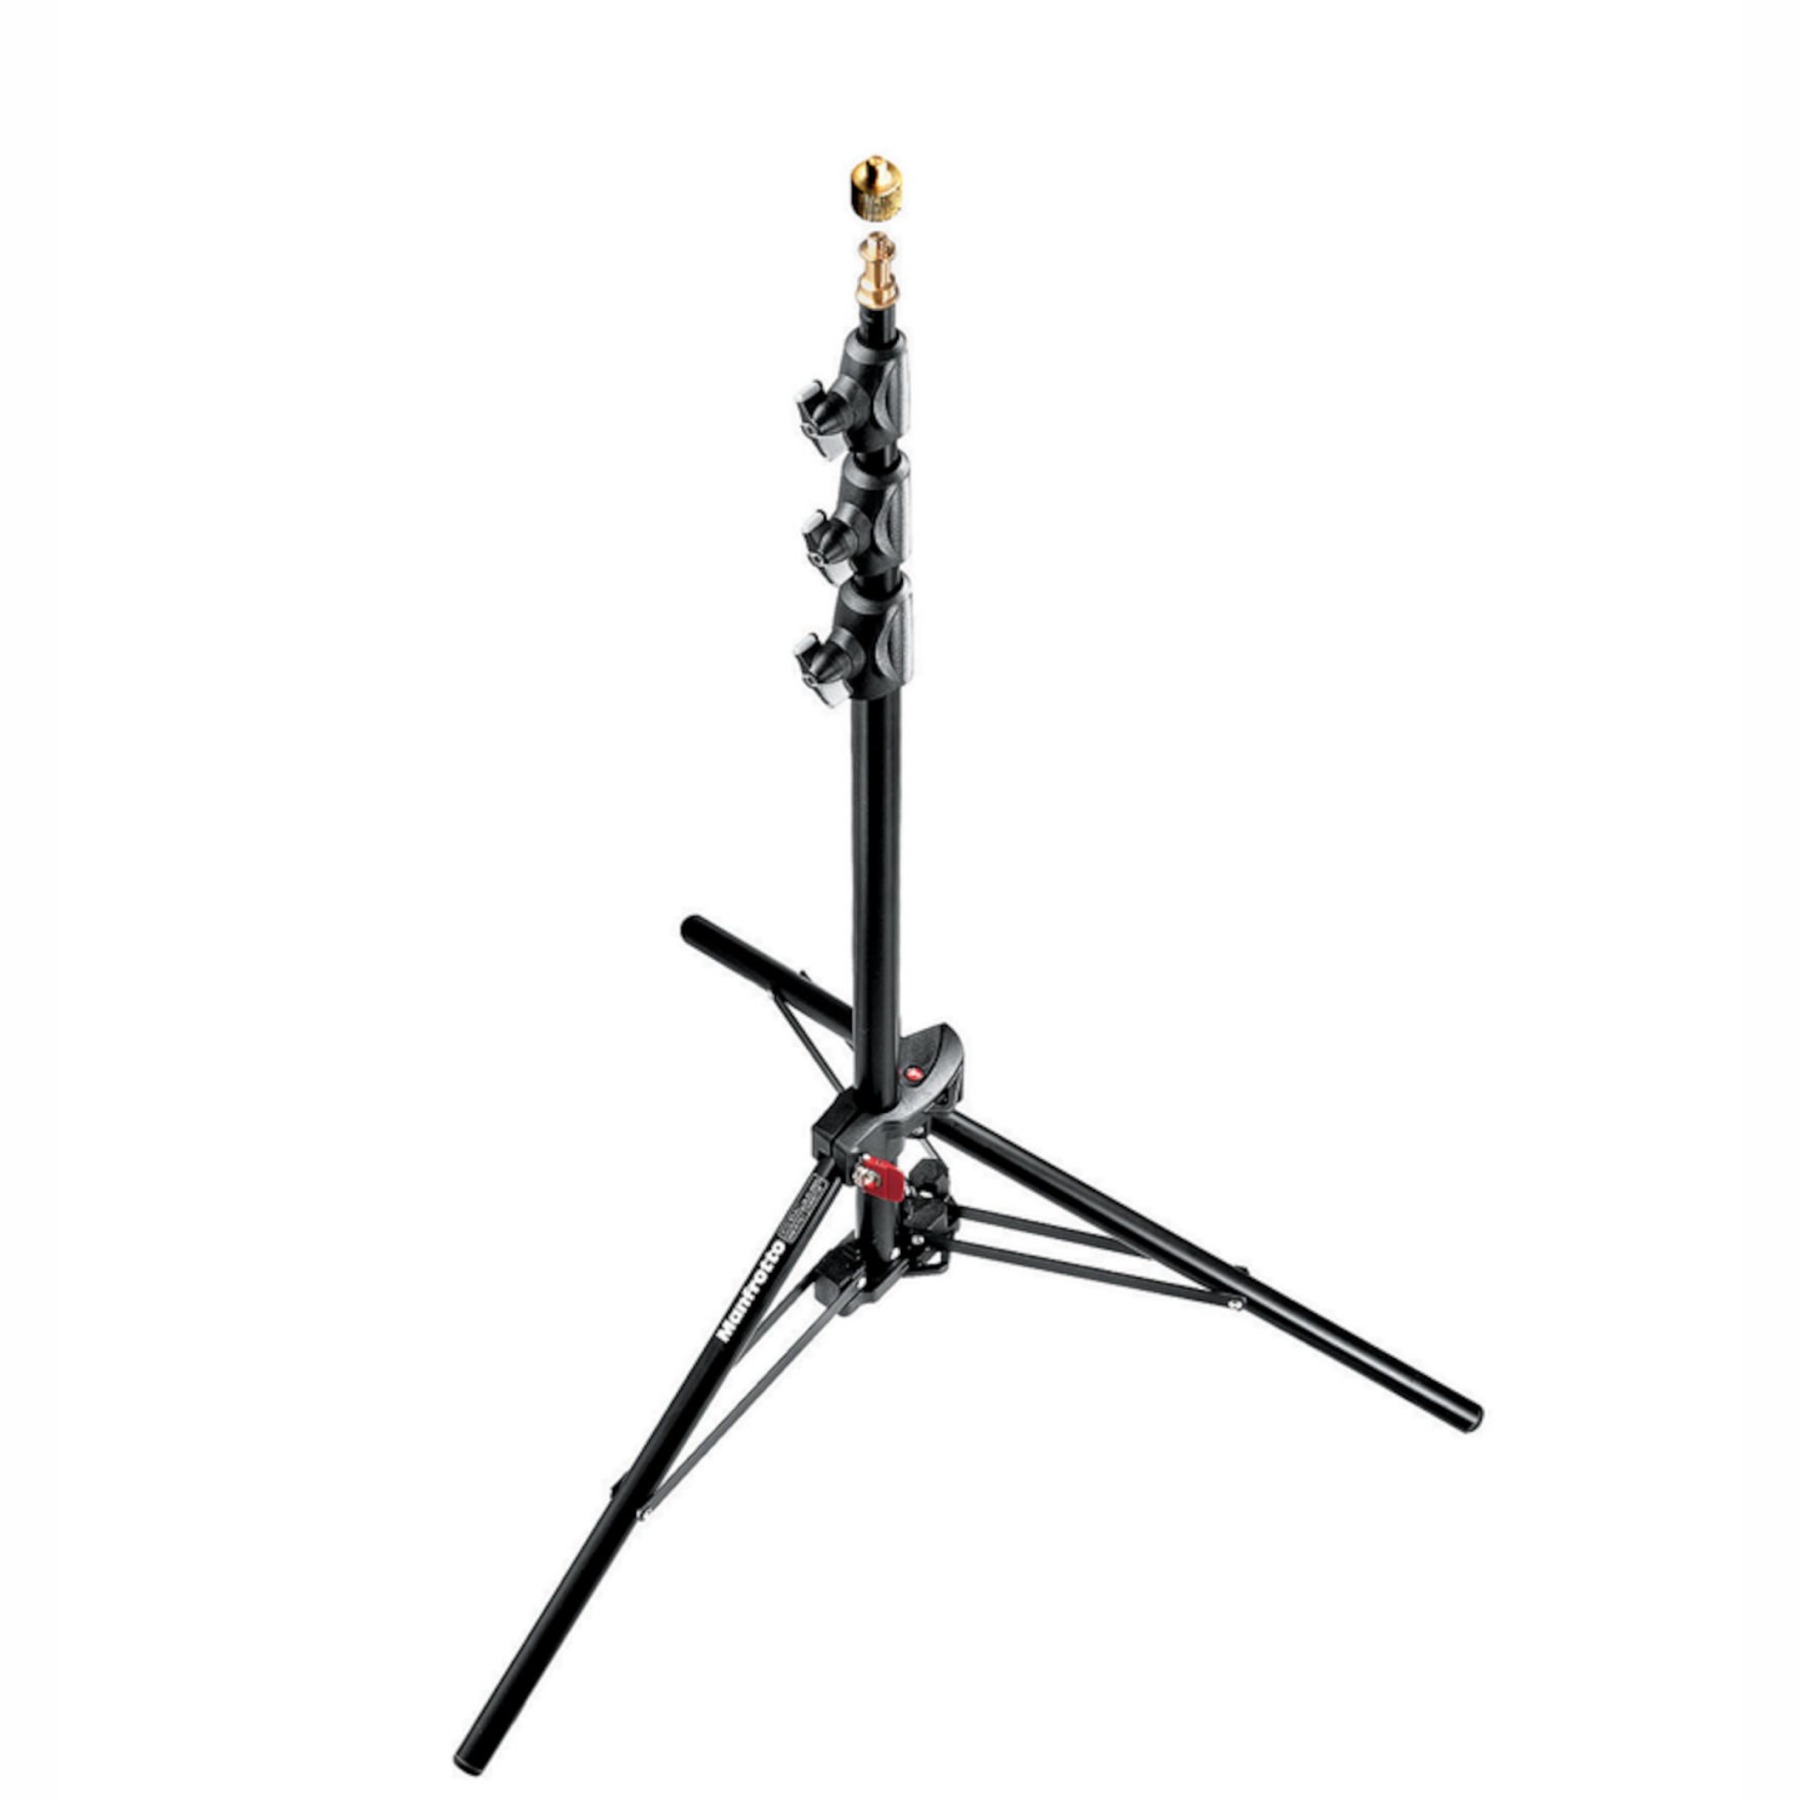 Manfrotto 1051 Compact Photo Stand Mini, Air Cushioned and Portable